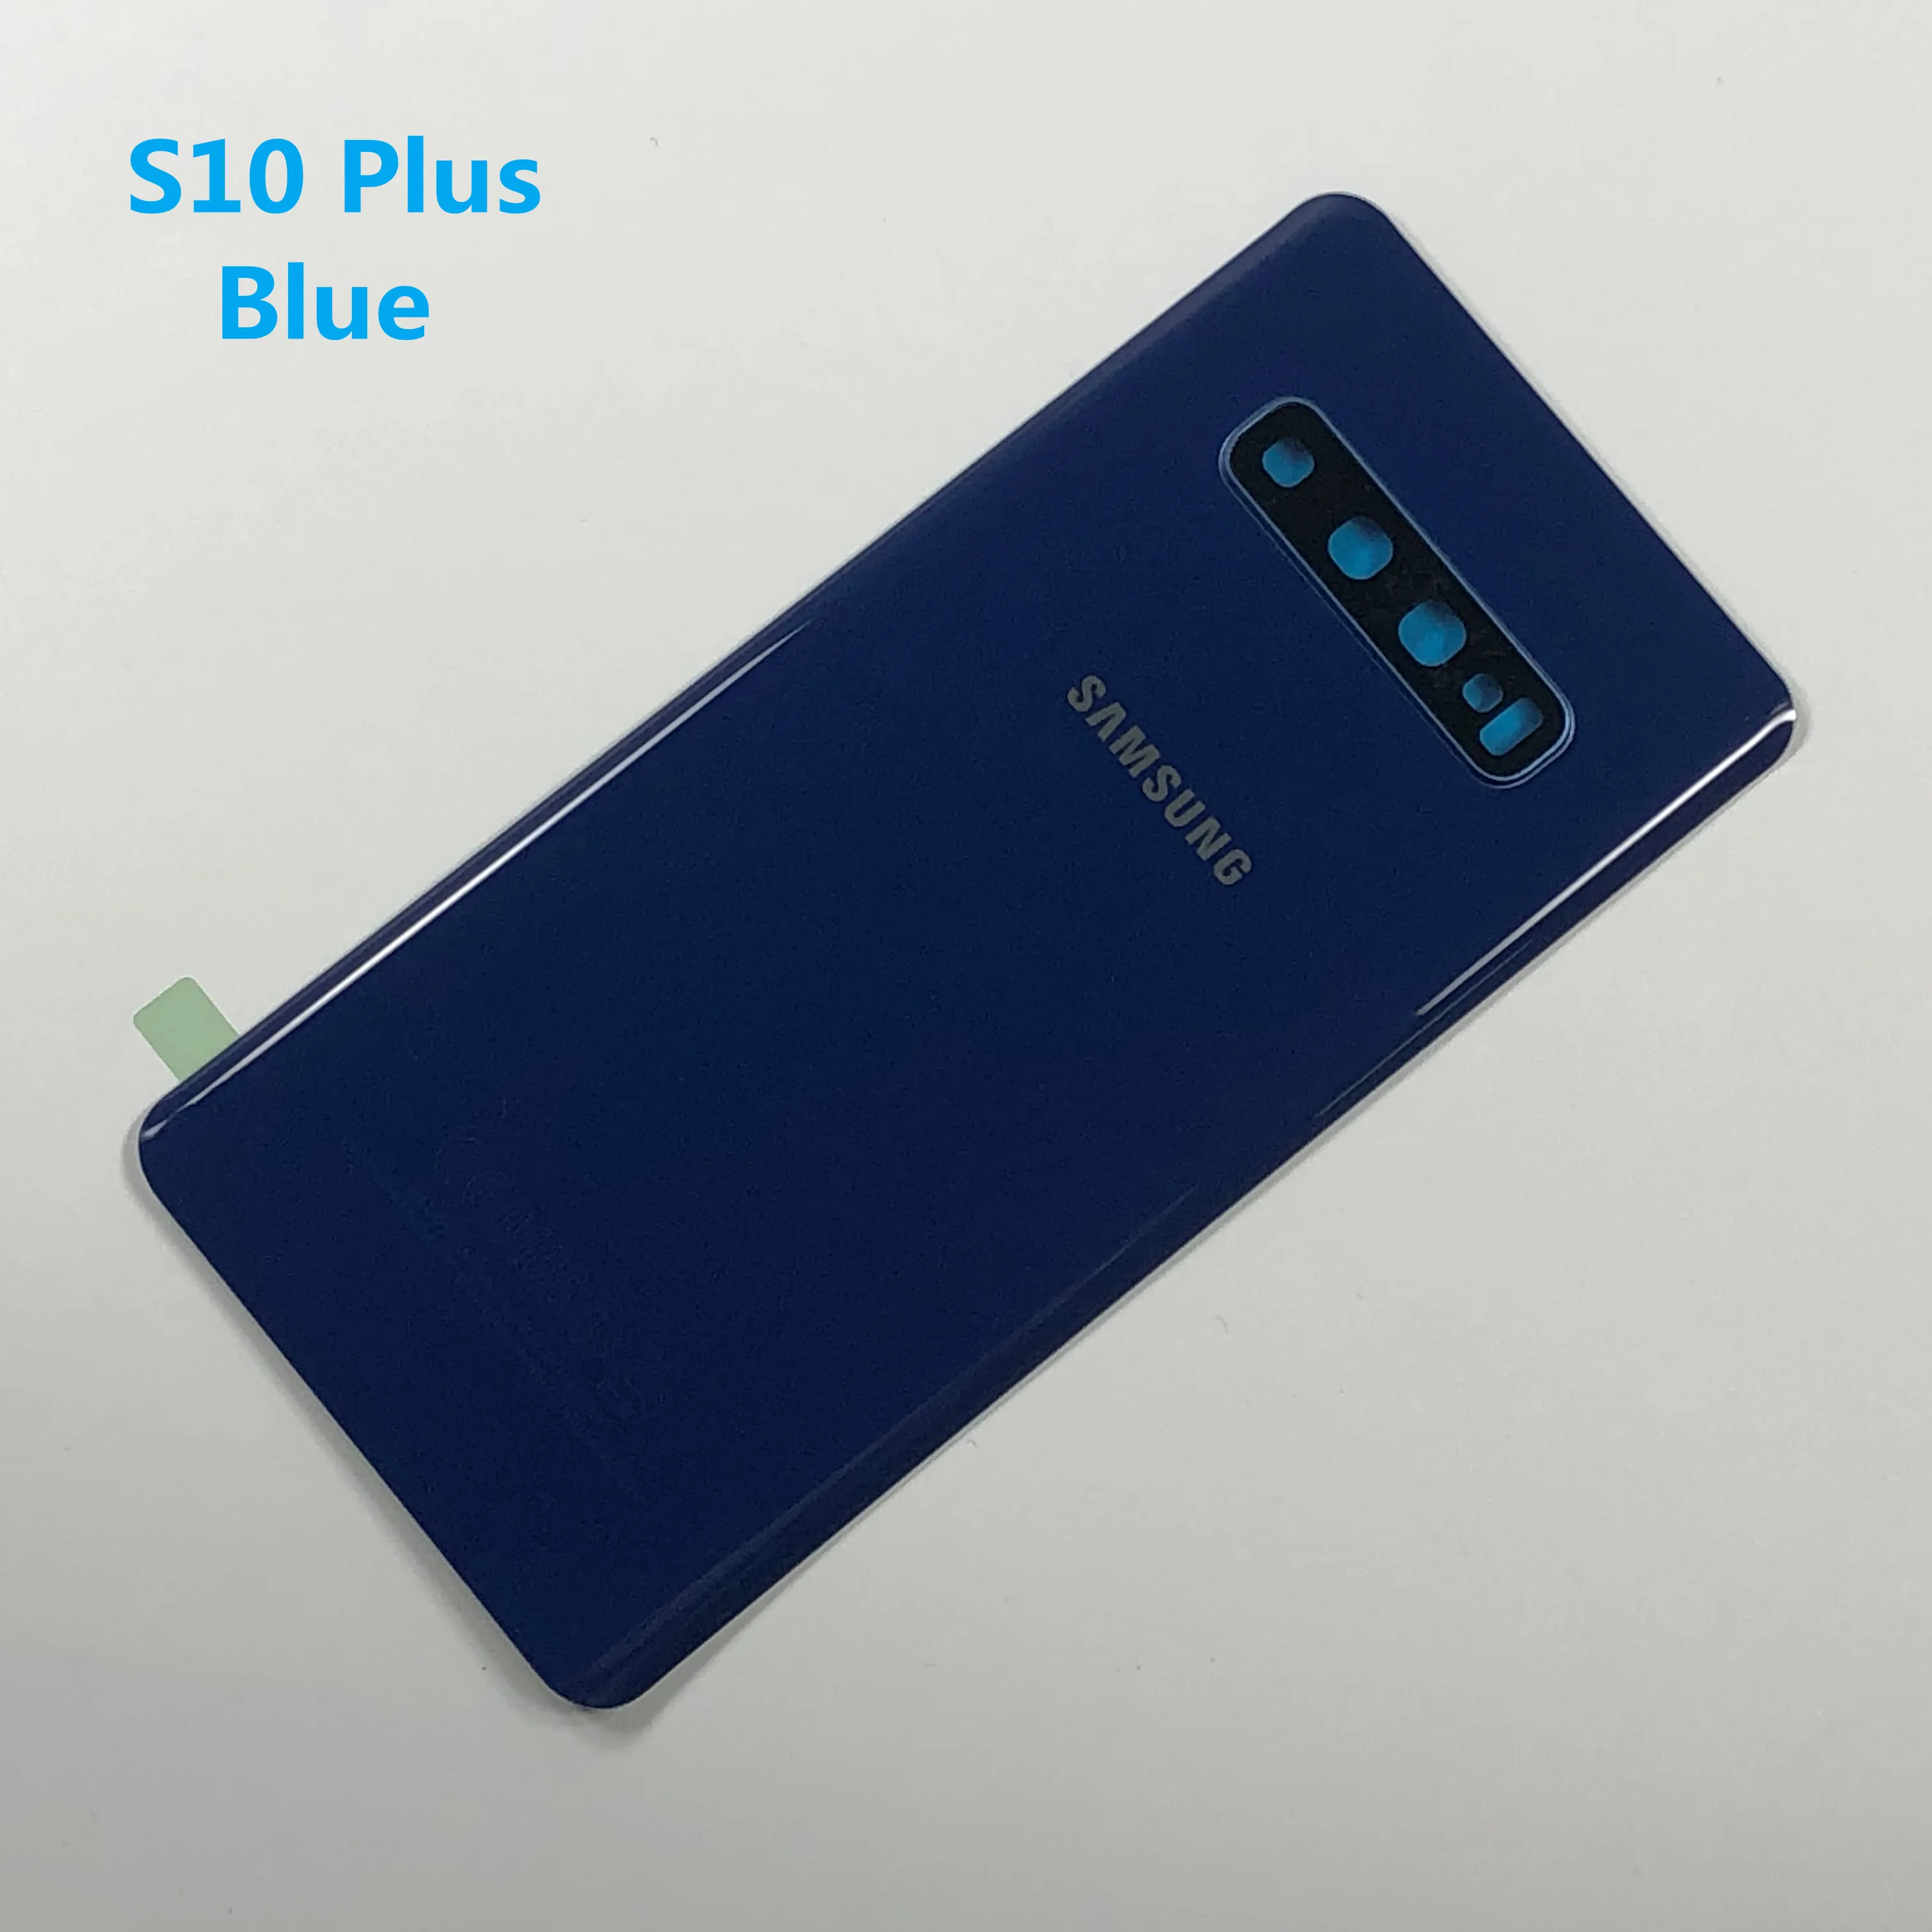 SAMSUNG Galaxy S10 S10 Plus  S10e Back Glass Battery Cover Rear Door Housing Case For SAMSUNG S10 S10+ S10e Back Glass Cover 